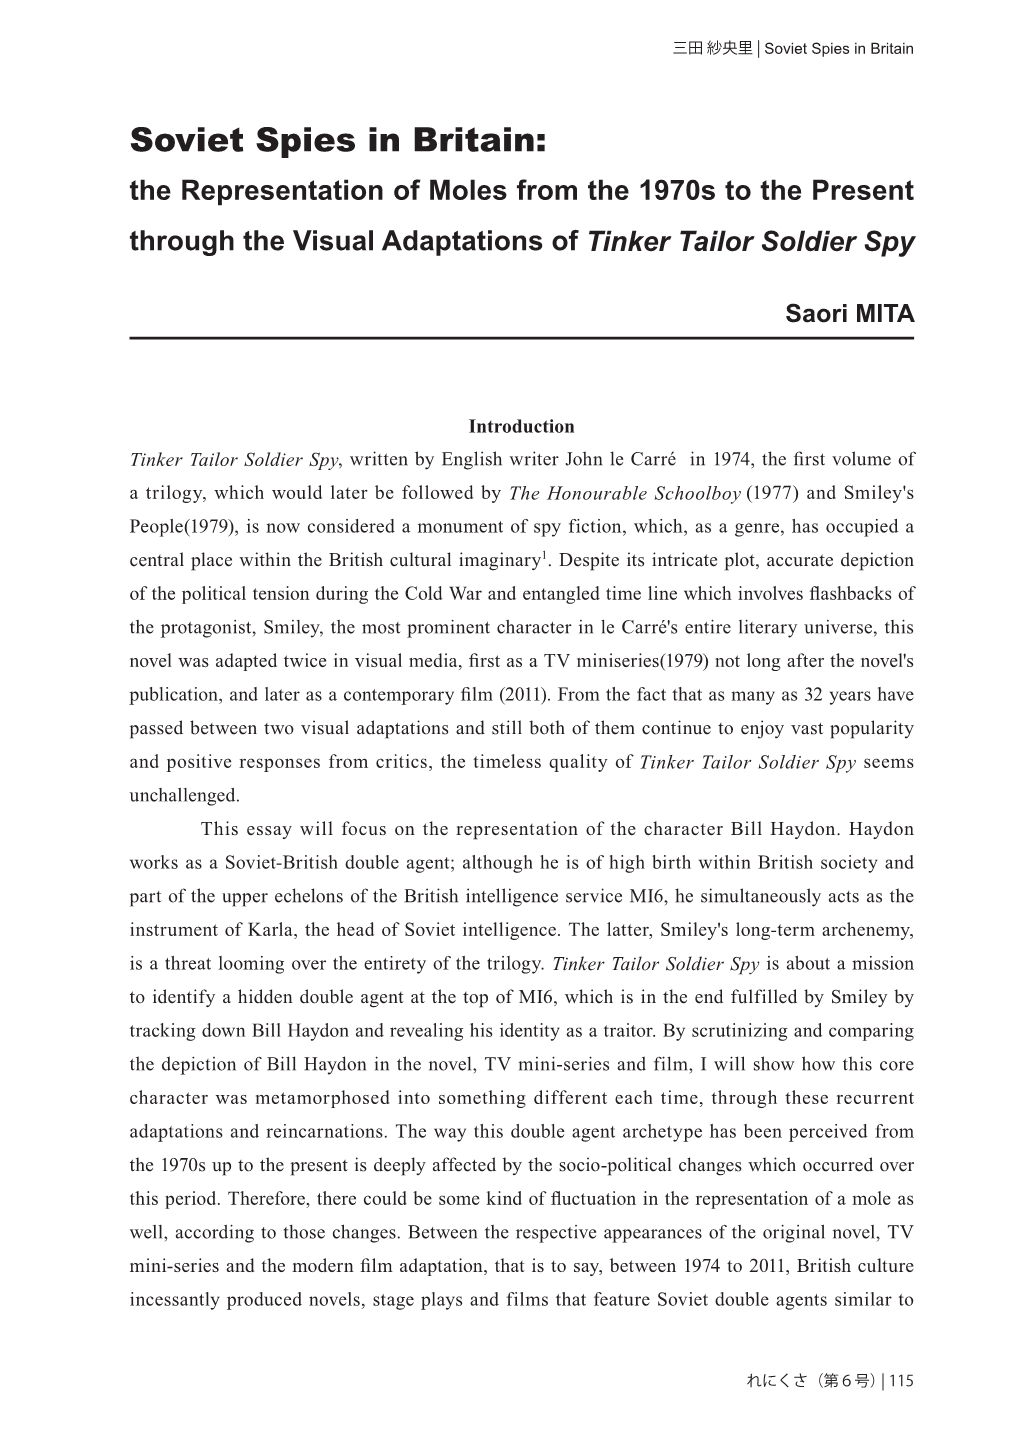 Soviet Spies in Britain: the Representation of Moles from the 1970S to the Present Through the Visual Adaptations of Tinker Tailor Soldier Spy